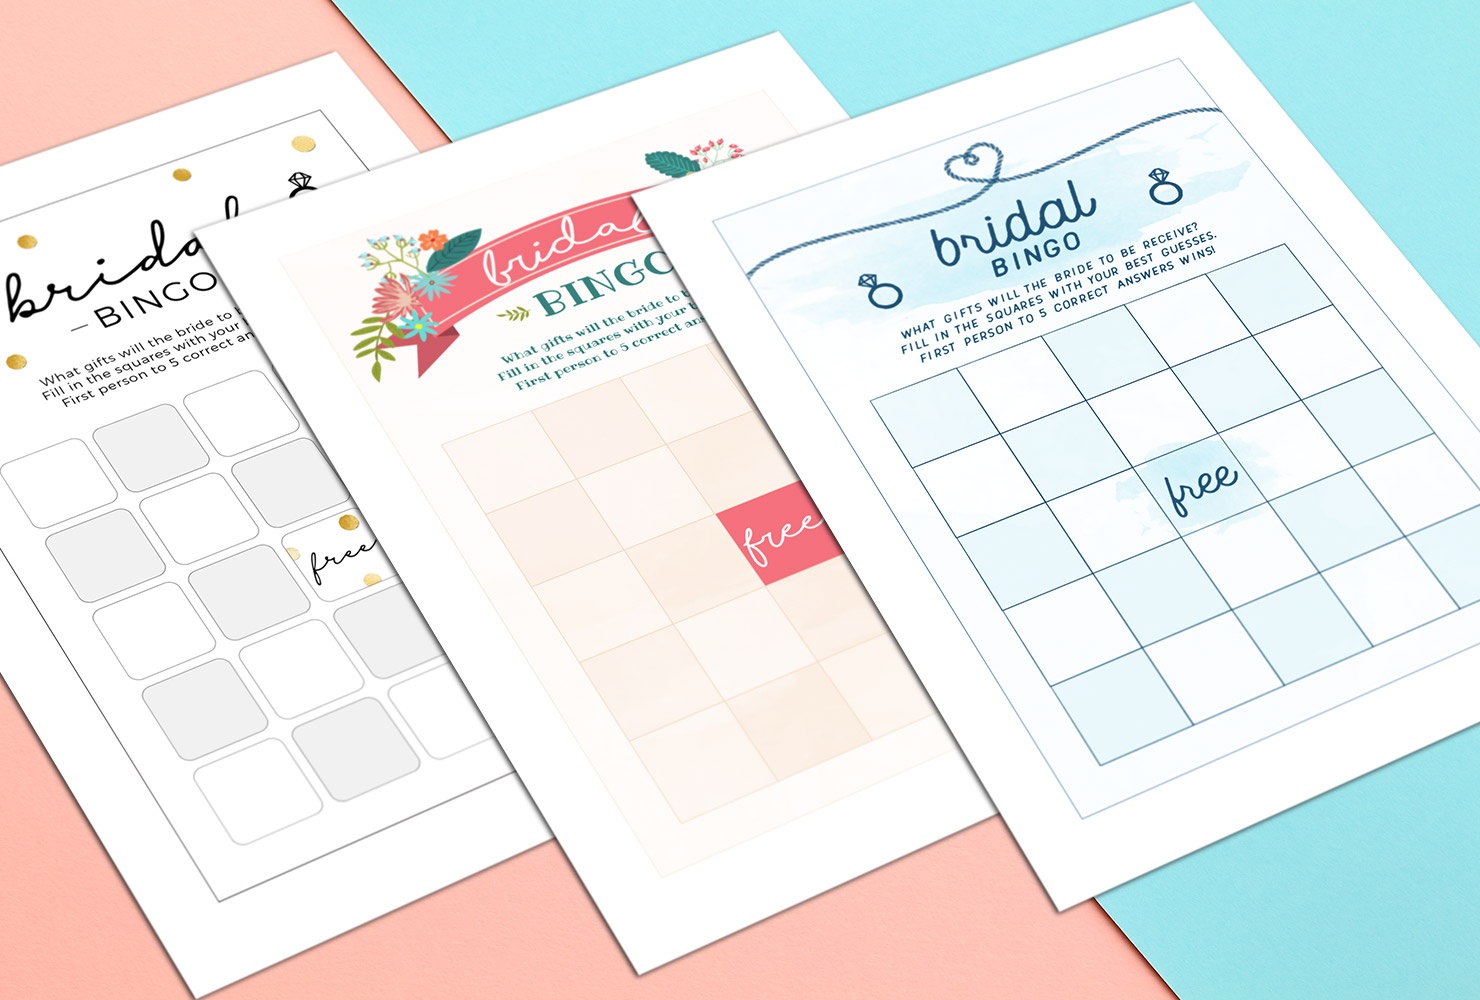 How To Play Bridal Shower Bingo (With Printables) | Shutterfly - Free Printable Bridal Shower Bingo